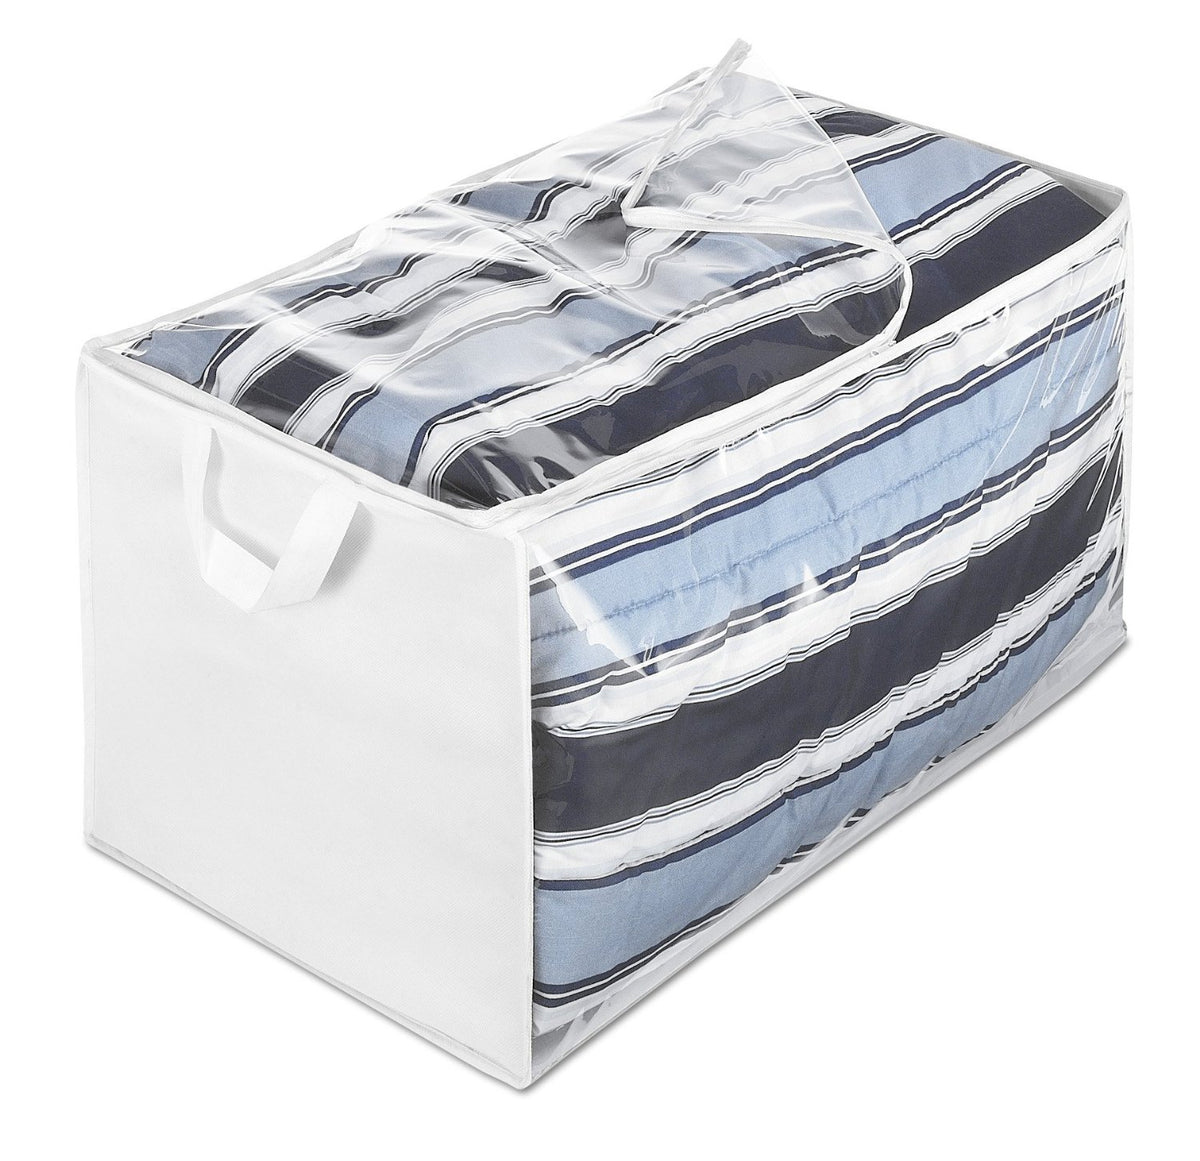 buy storage bags at cheap rate in bulk. wholesale & retail small & large storage bags store.